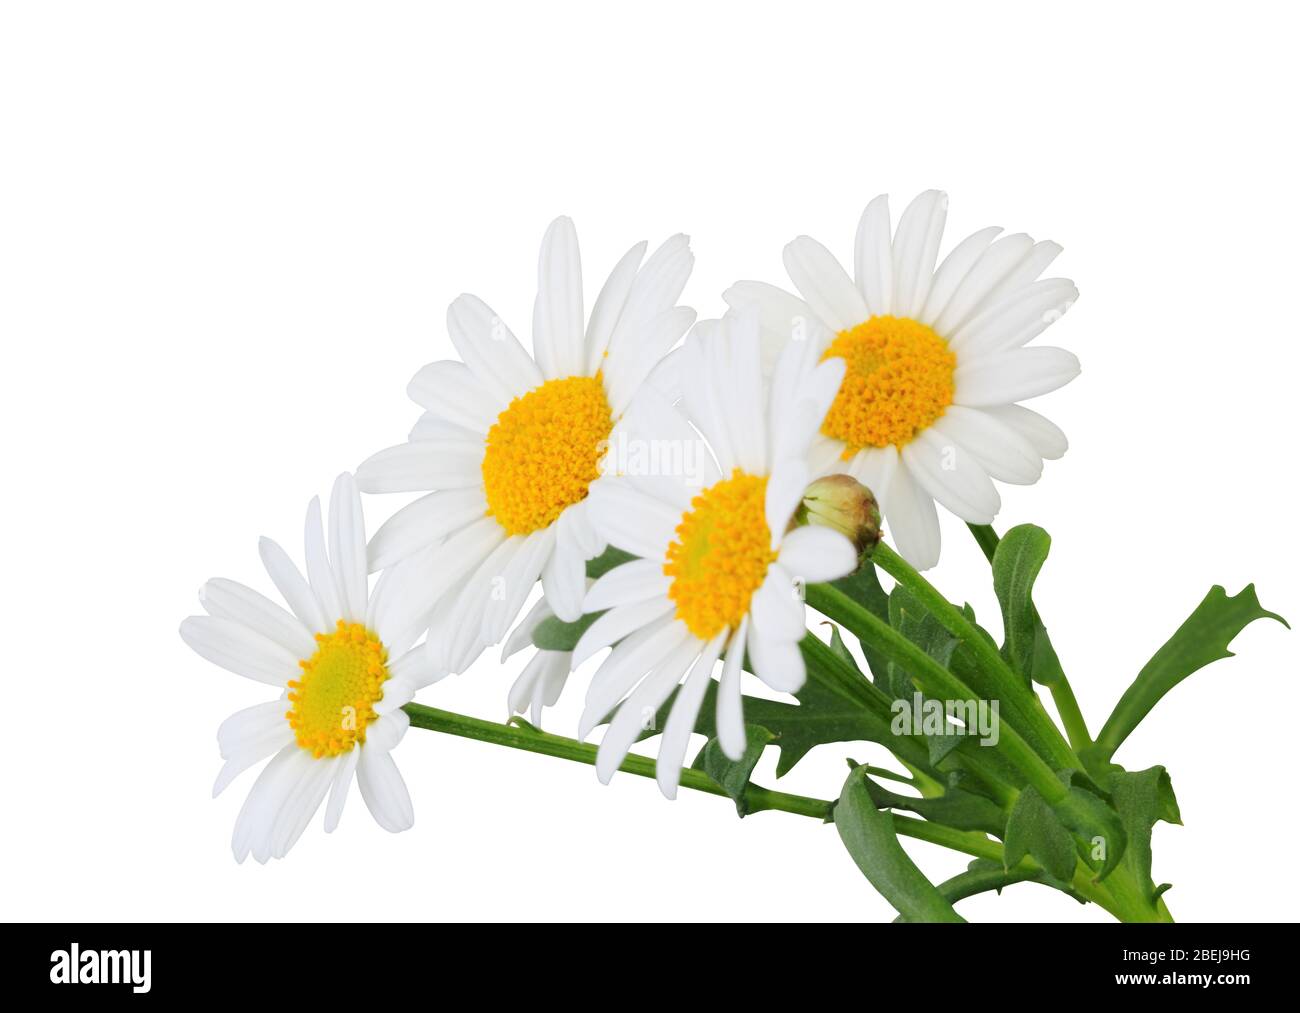 Daisies (Margeriten) isolated on white background, including clipping path. Germany Stock Photo